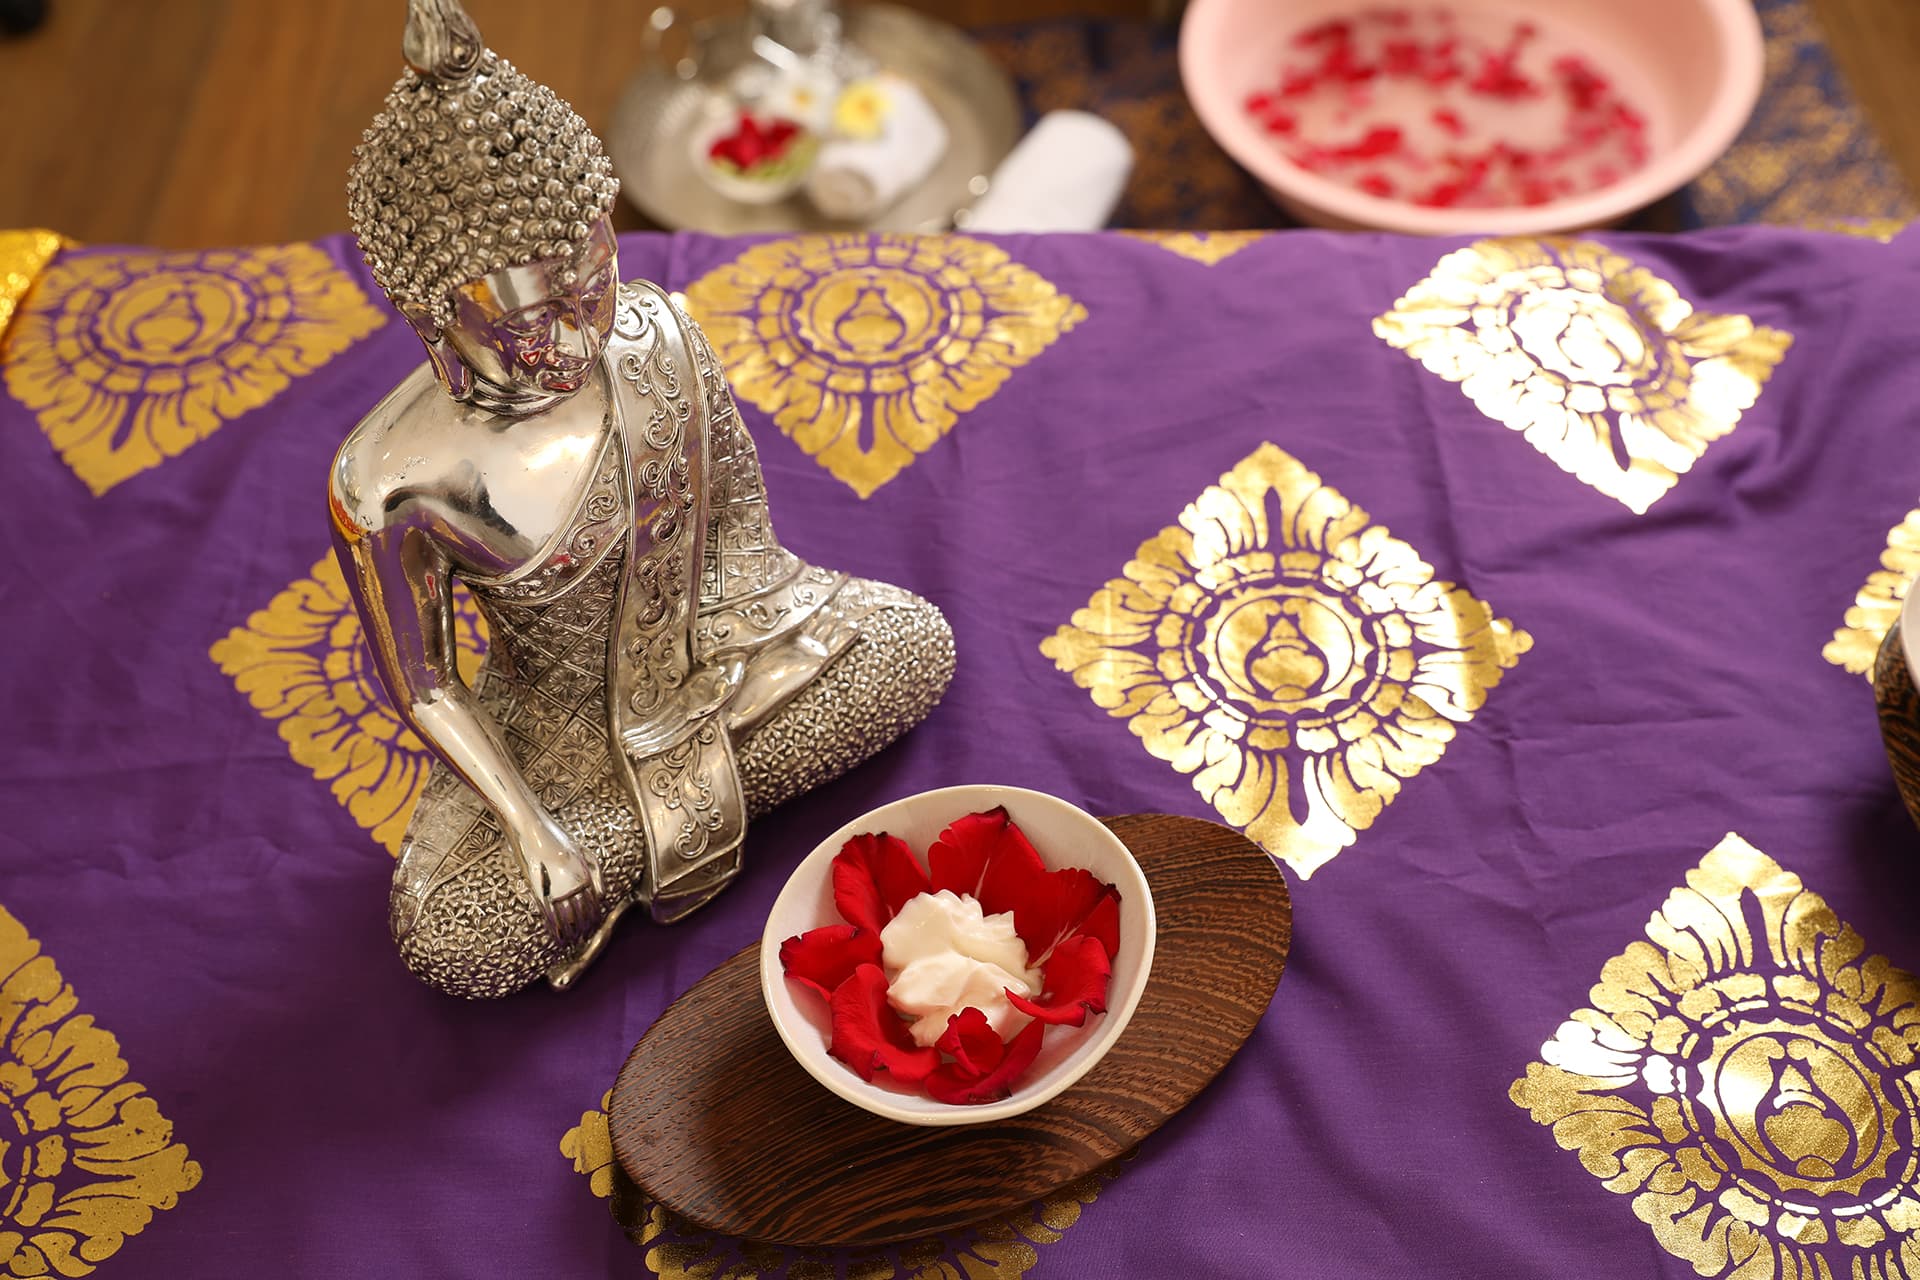 A bowl with rose petals and a Buddha figure on a colorful cloth in the massage room of a gym